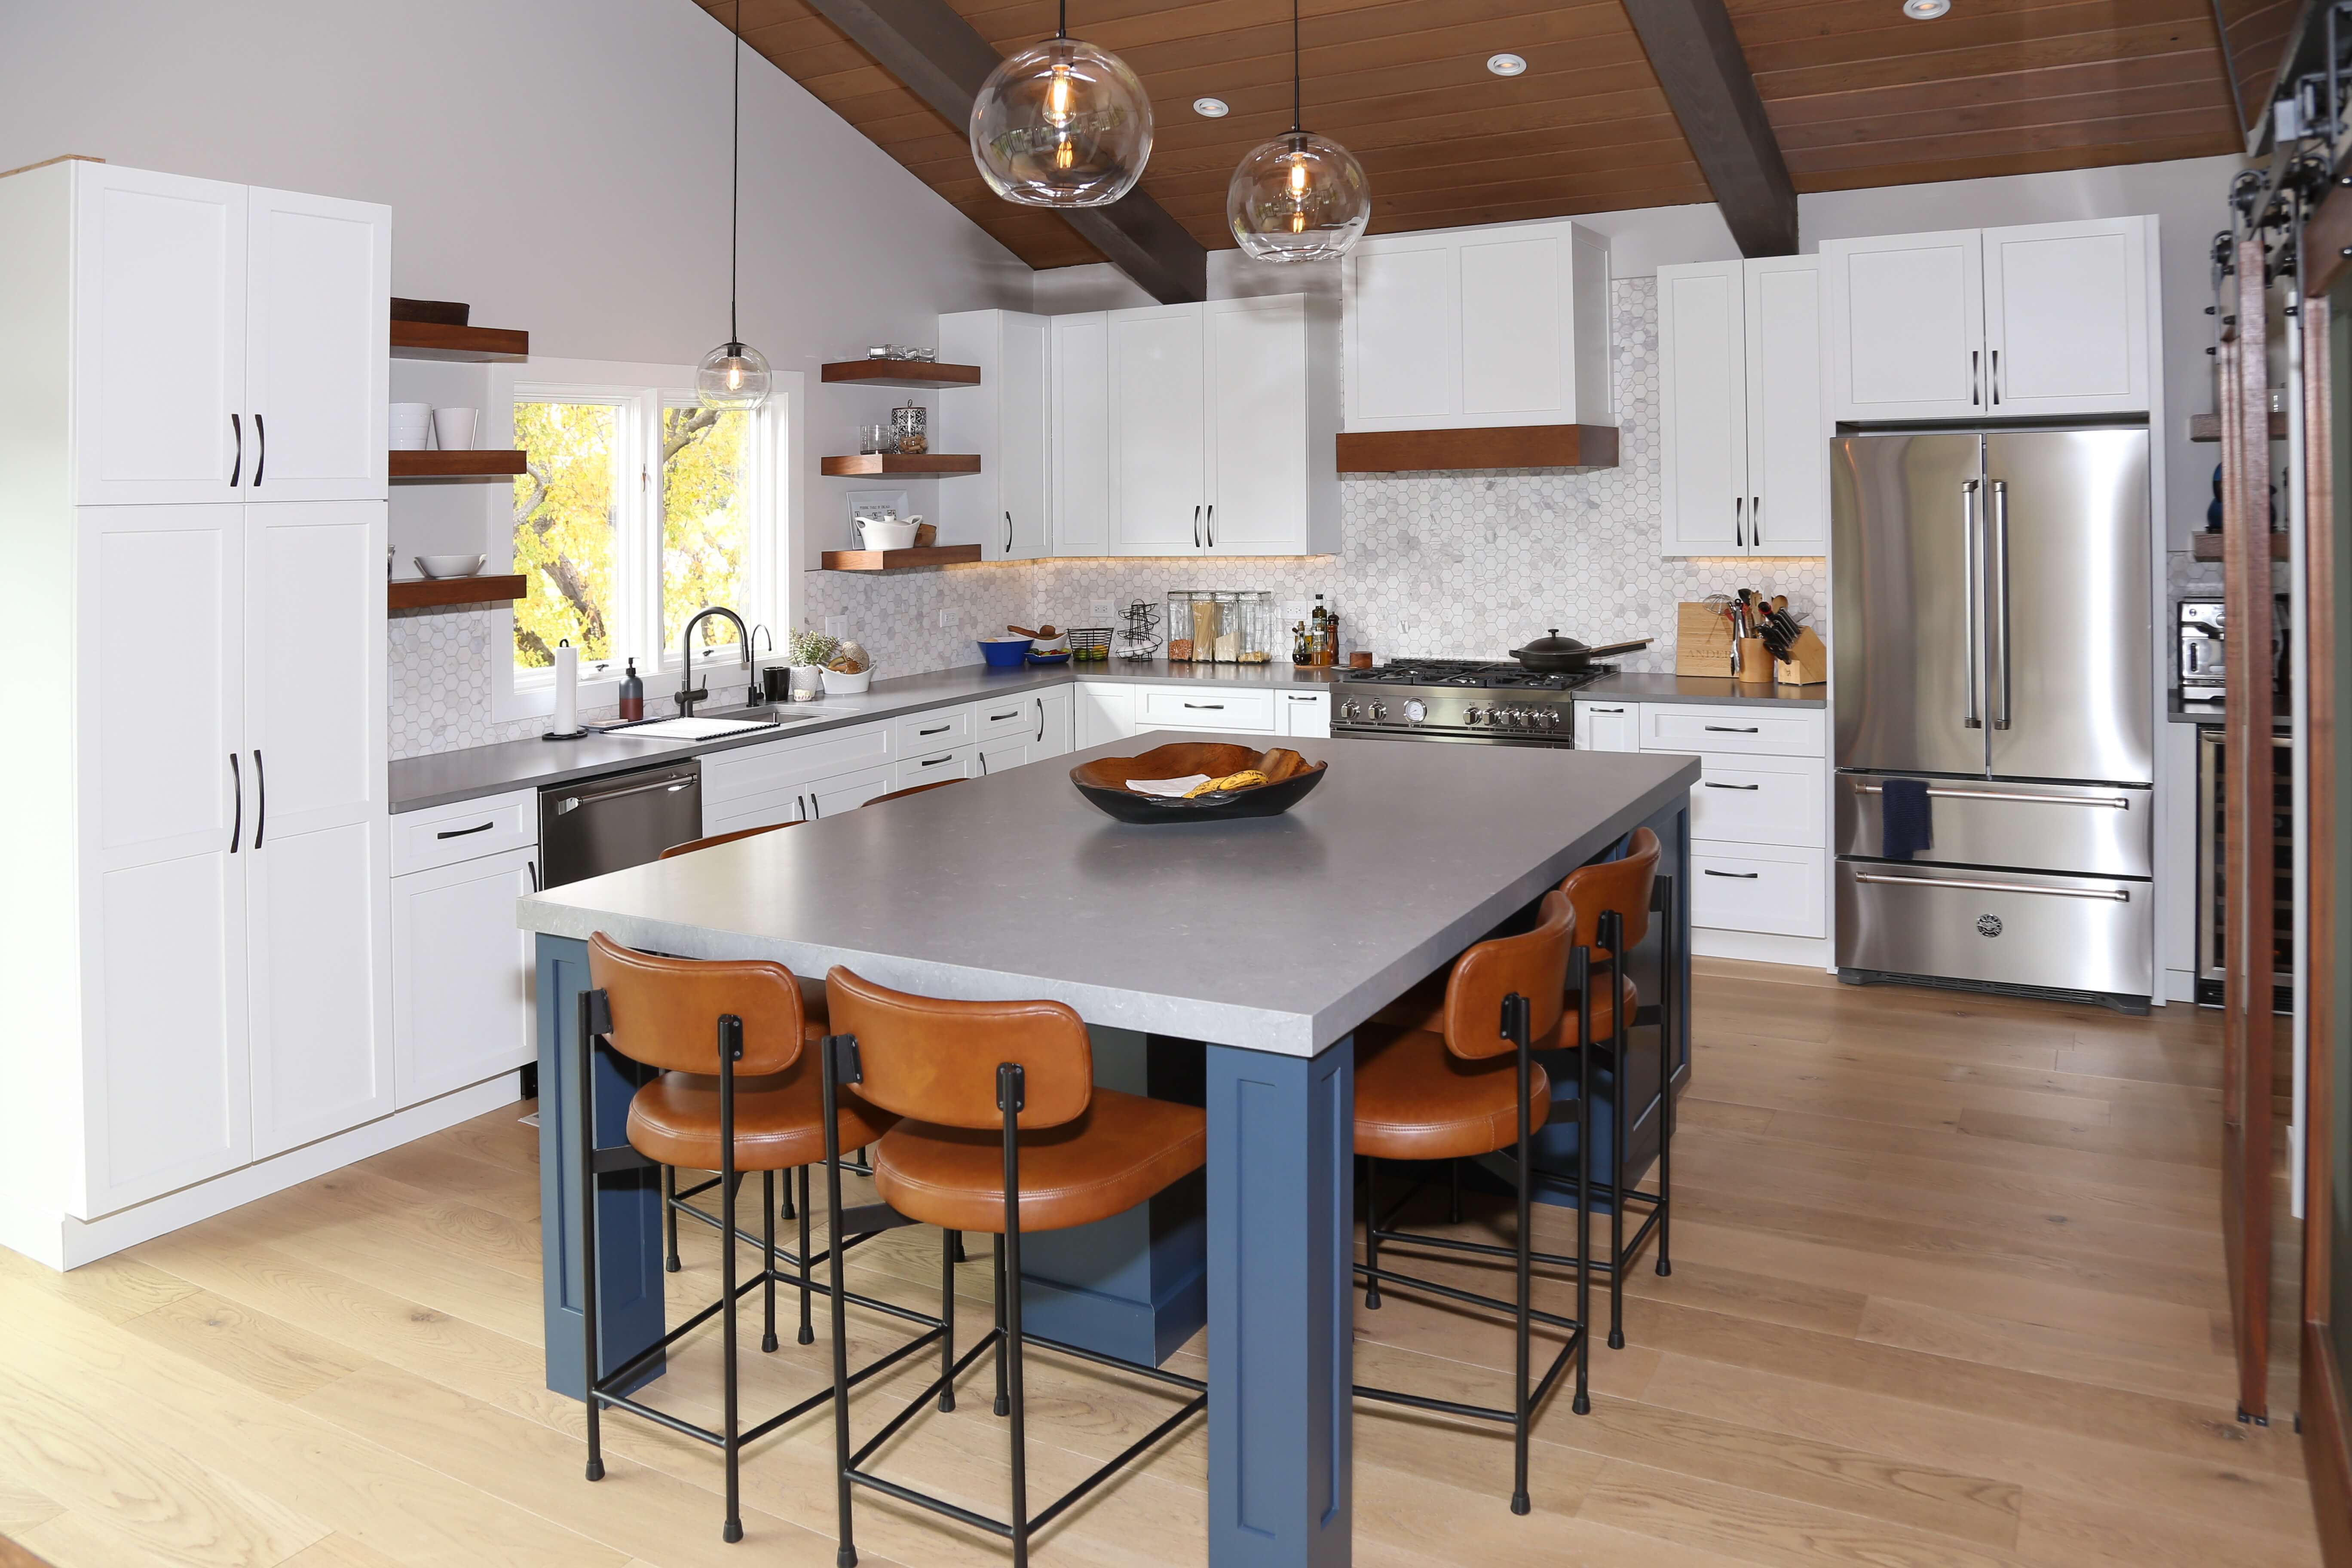 kitchen island converts to dining table